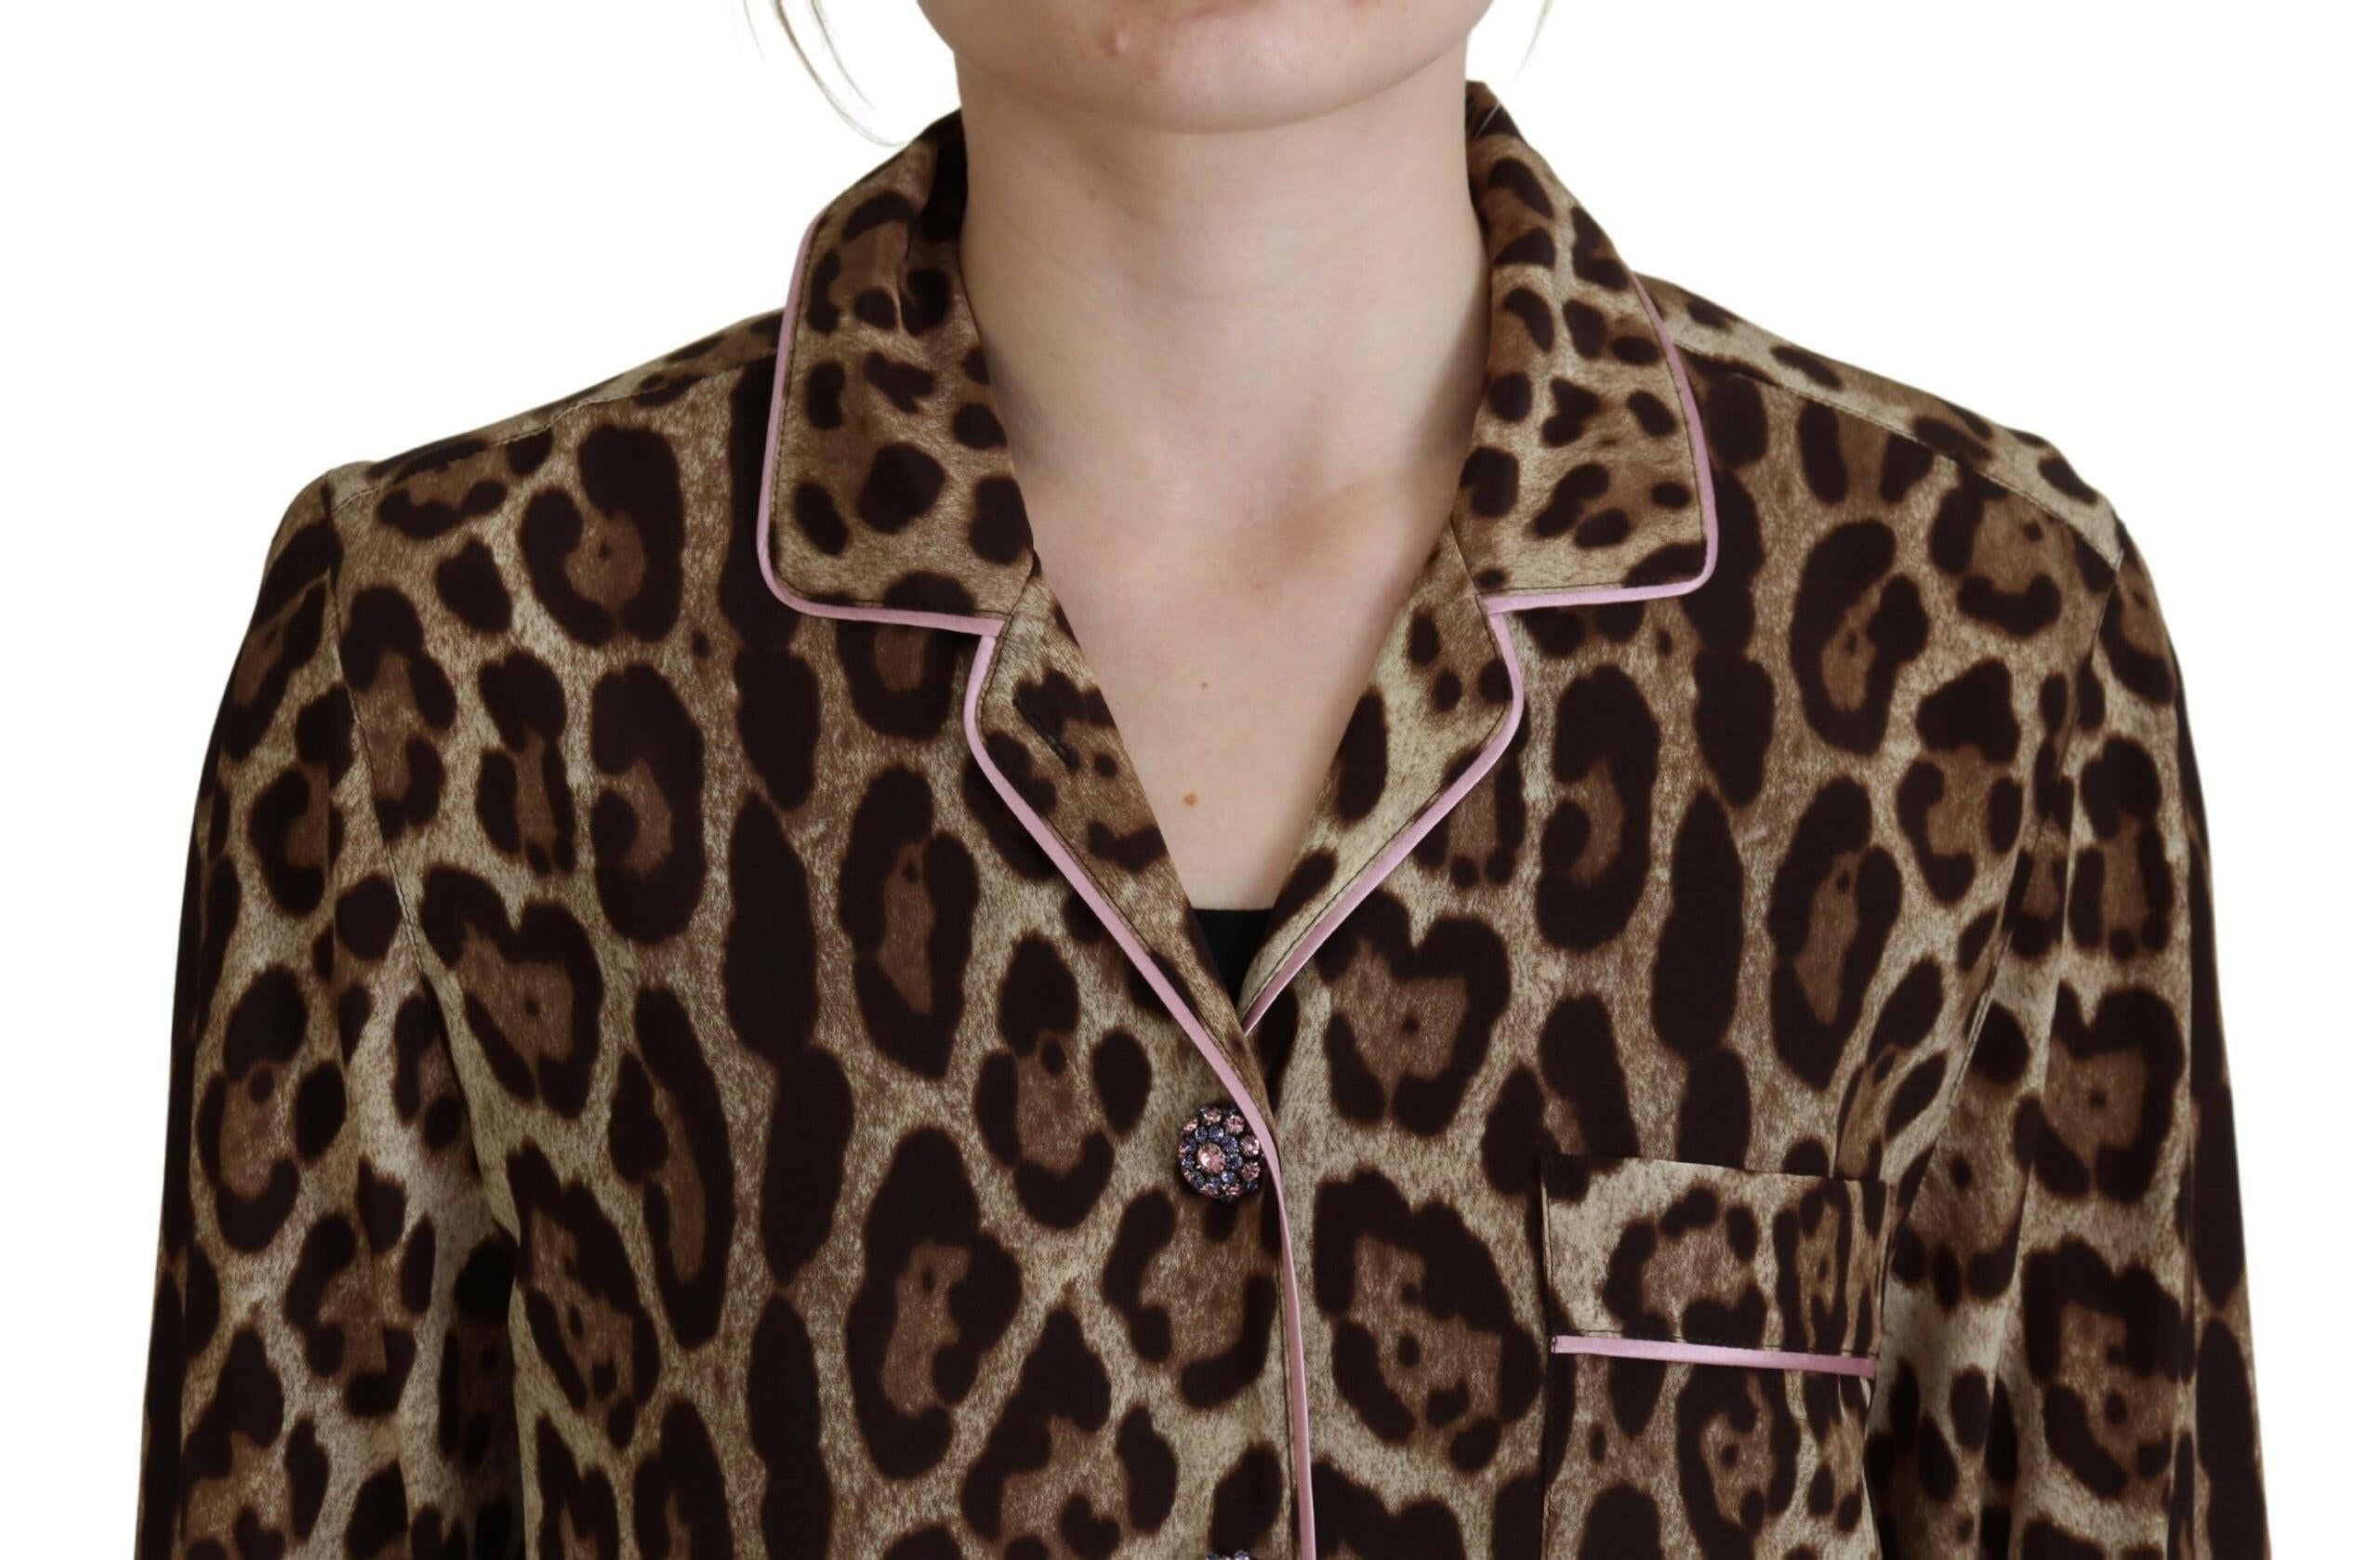 Dolce & Gabbana Brown Leopard Print Long Sleeves Blouse Top - GENUINE AUTHENTIC BRAND LLC  